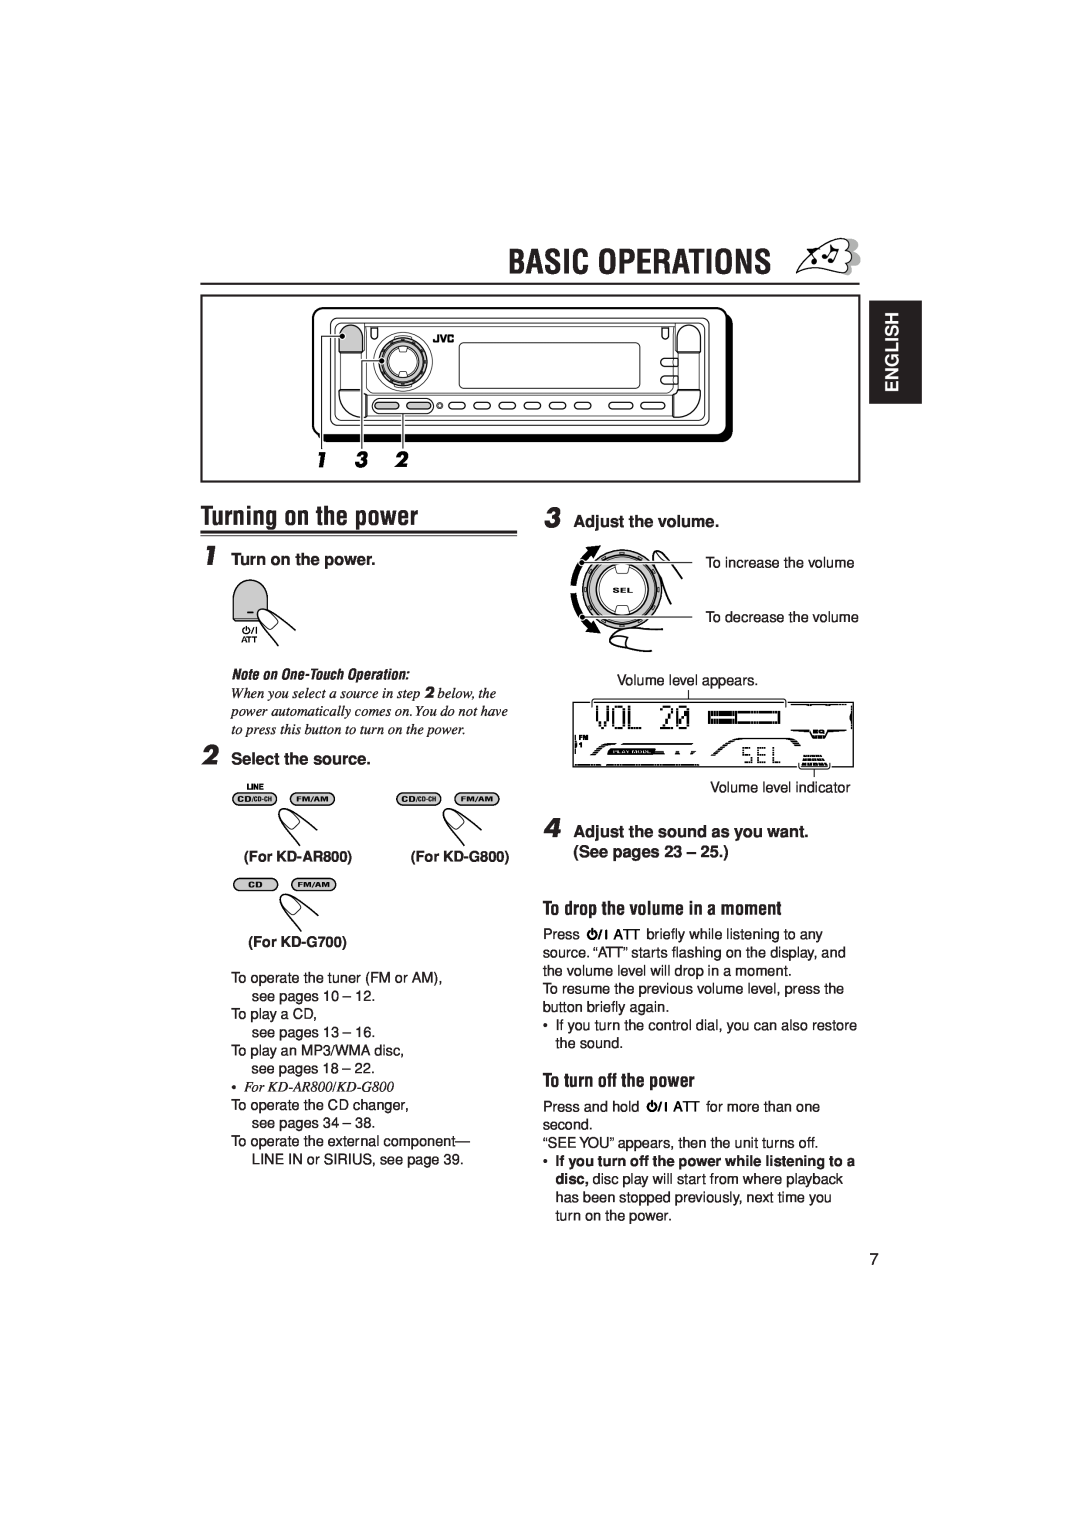 JVC KD-G700, KD-AR800 Basic Operations, To drop the volume in a moment, To turn off the power, 2Select the source, English 